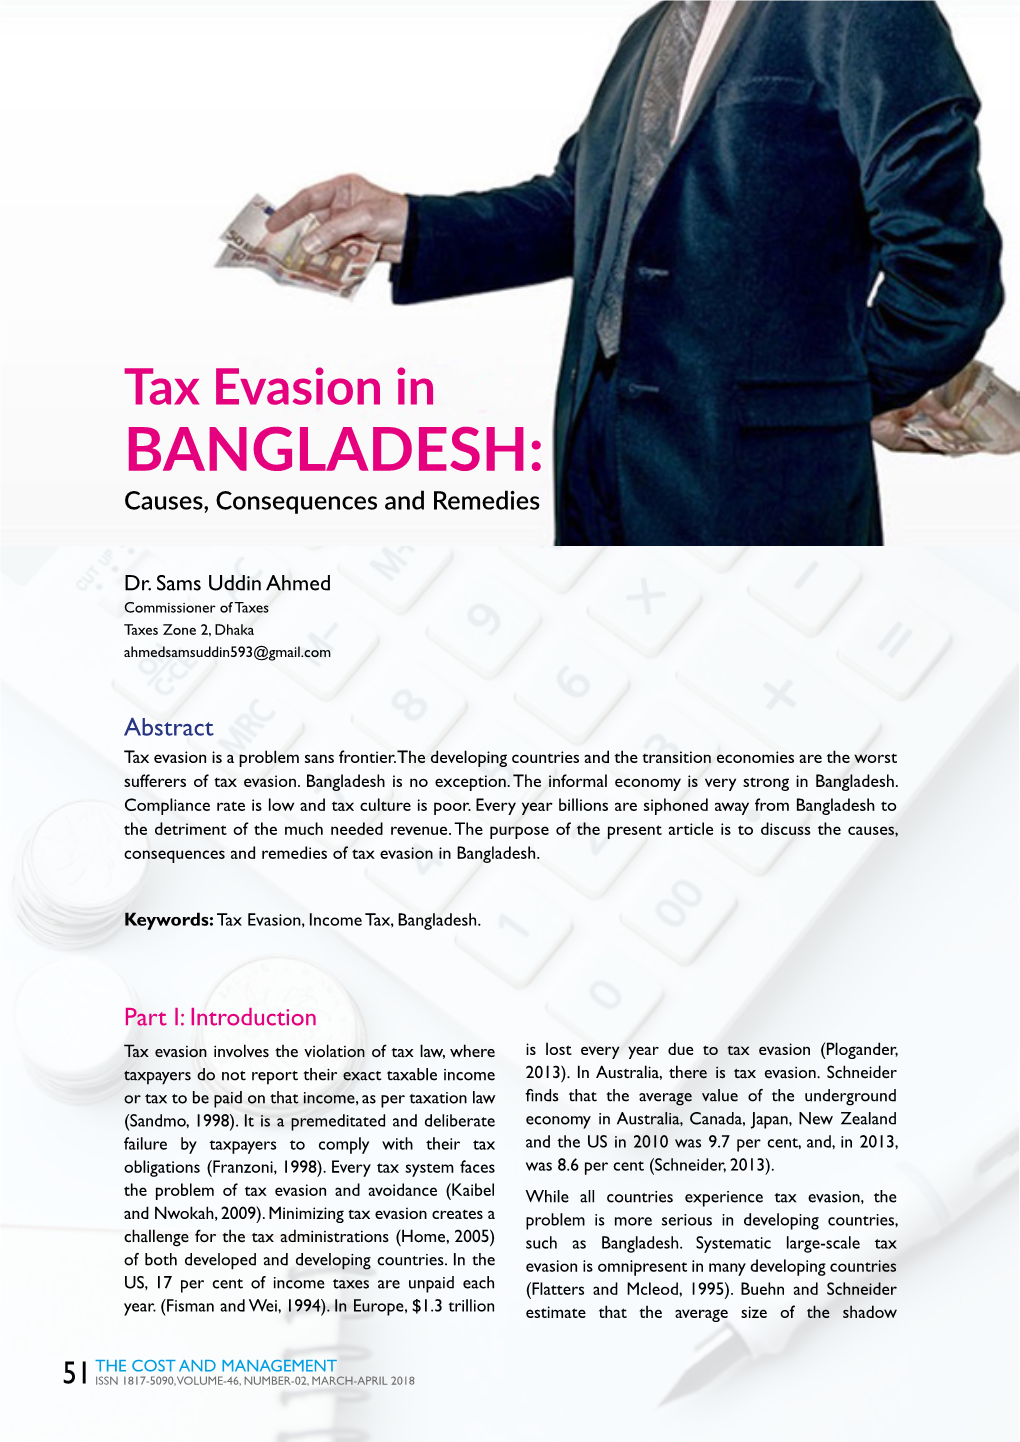 Tax Evasion in BANGLADESH: Causes, Consequences and Remedies